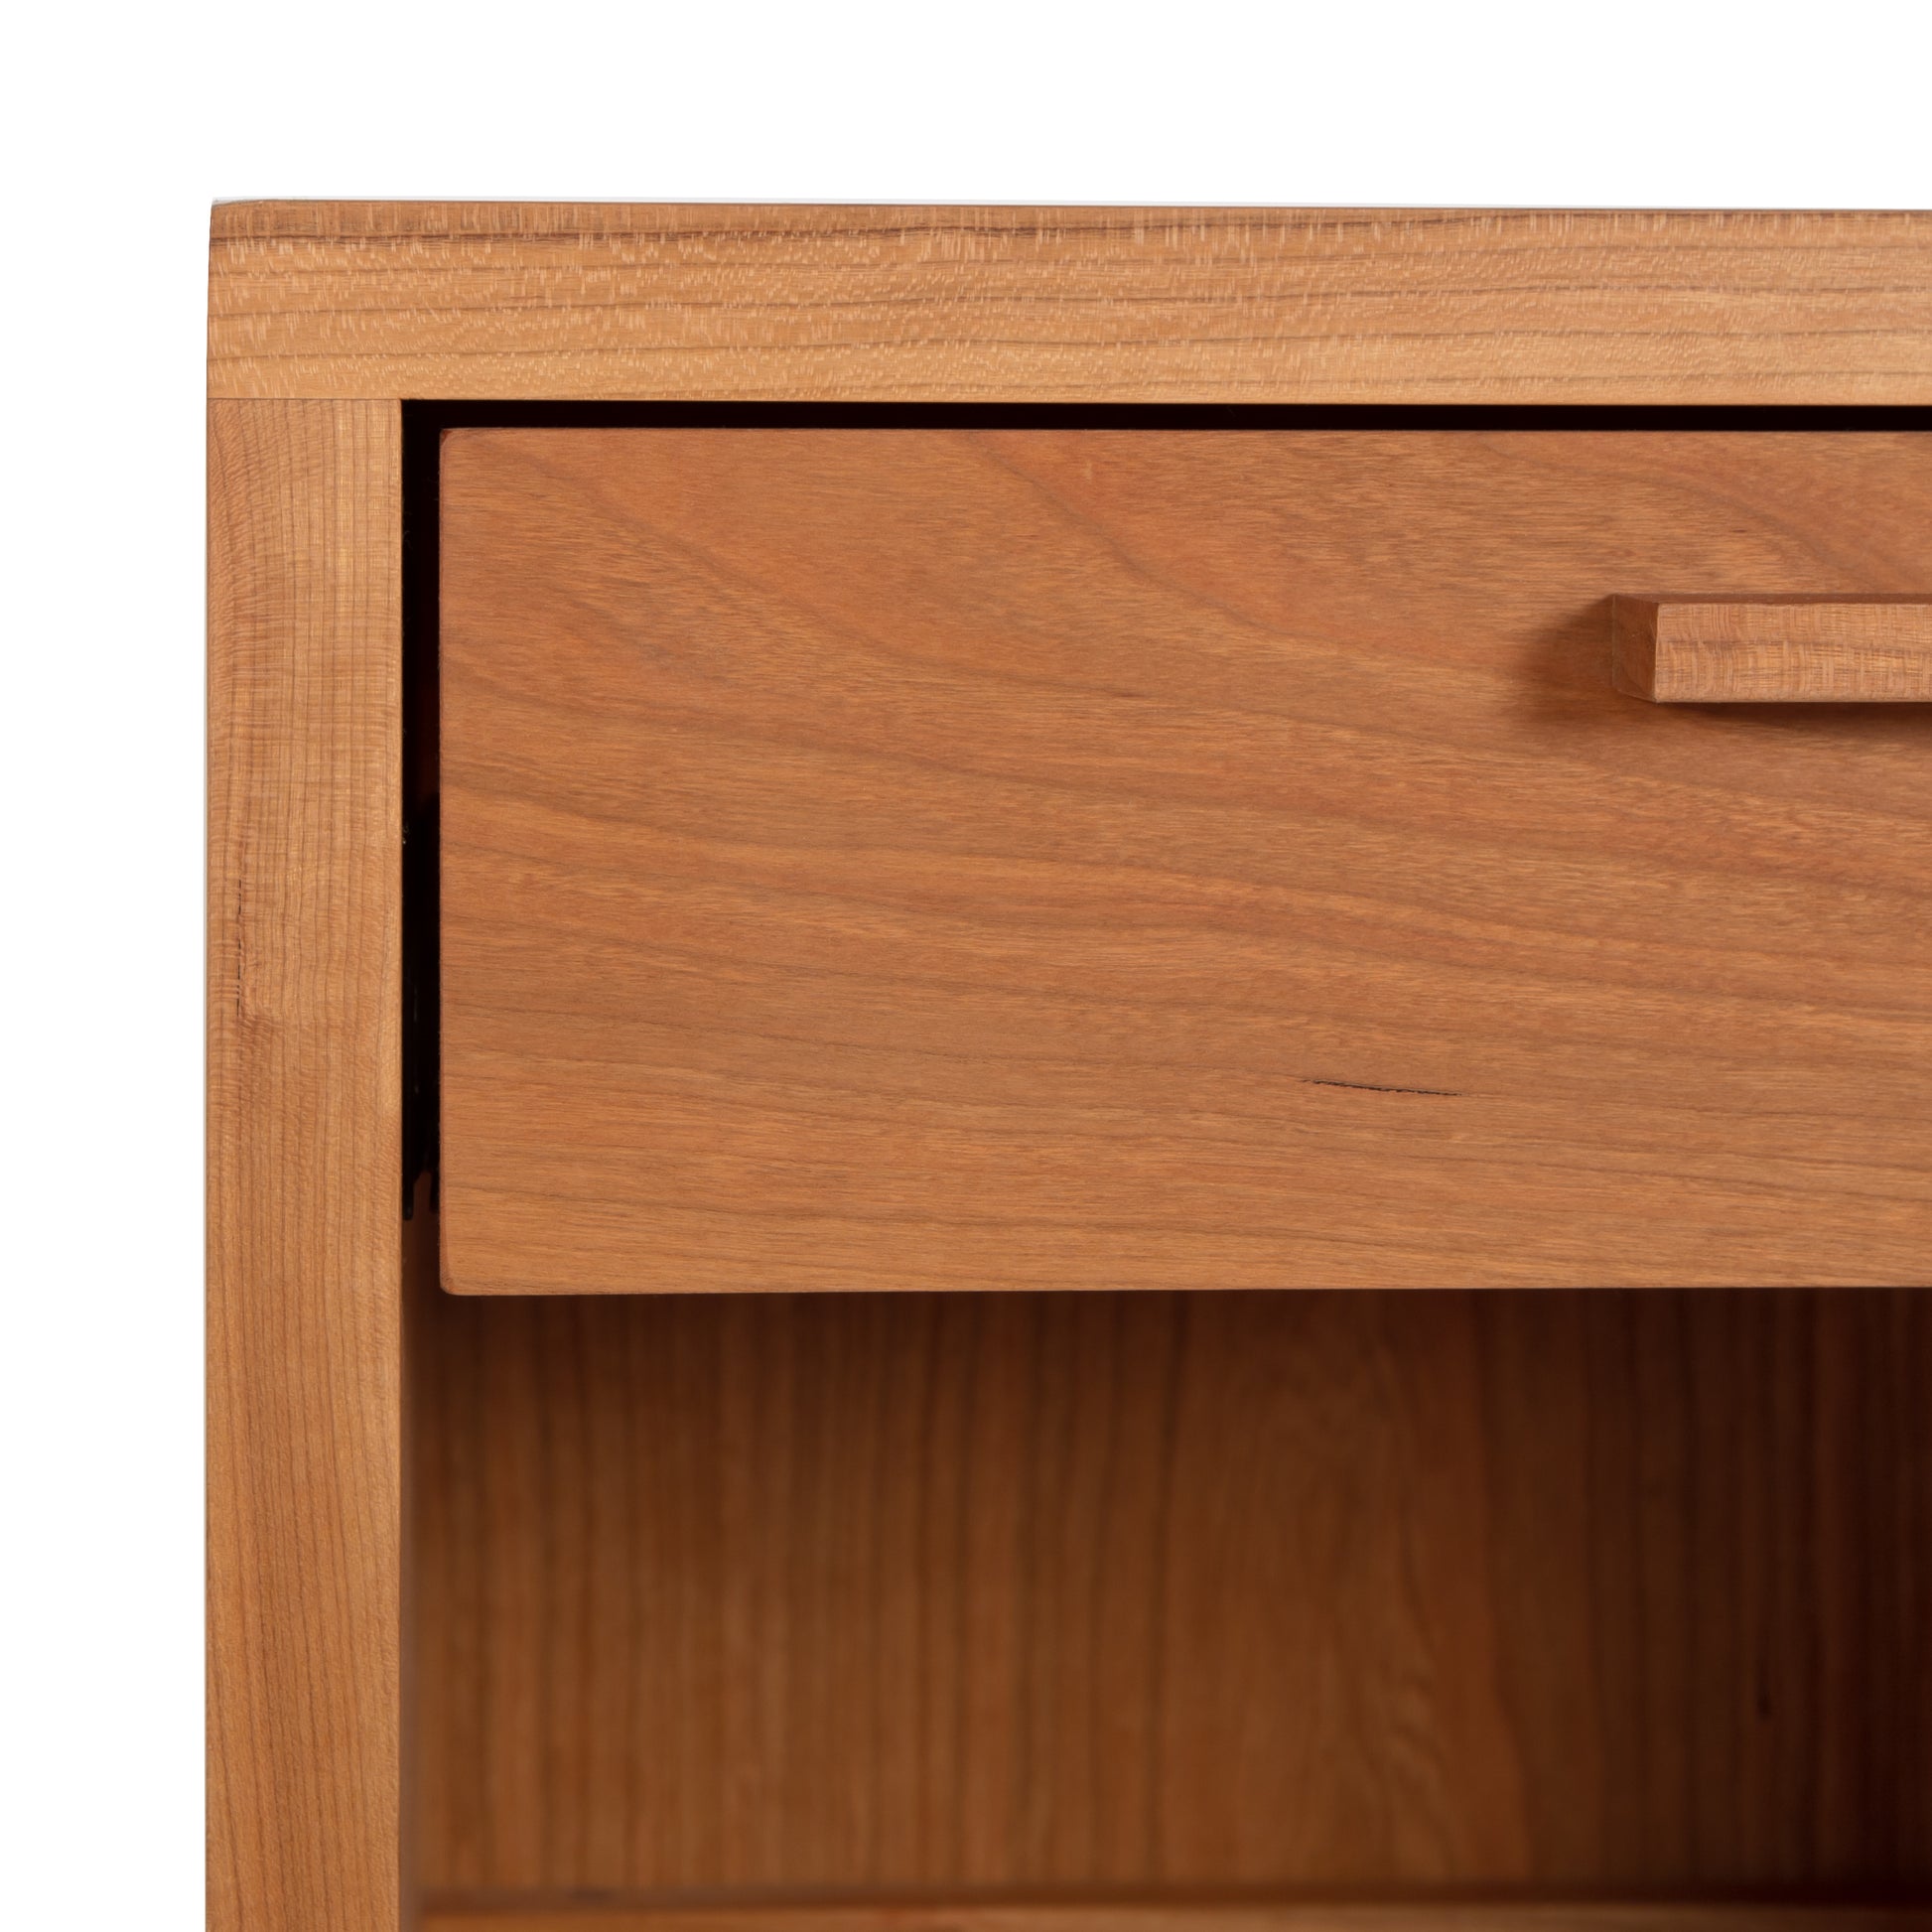 A close up of a Vermont Furniture Designs Loft 1-Drawer Enclosed Shelf Nightstand.